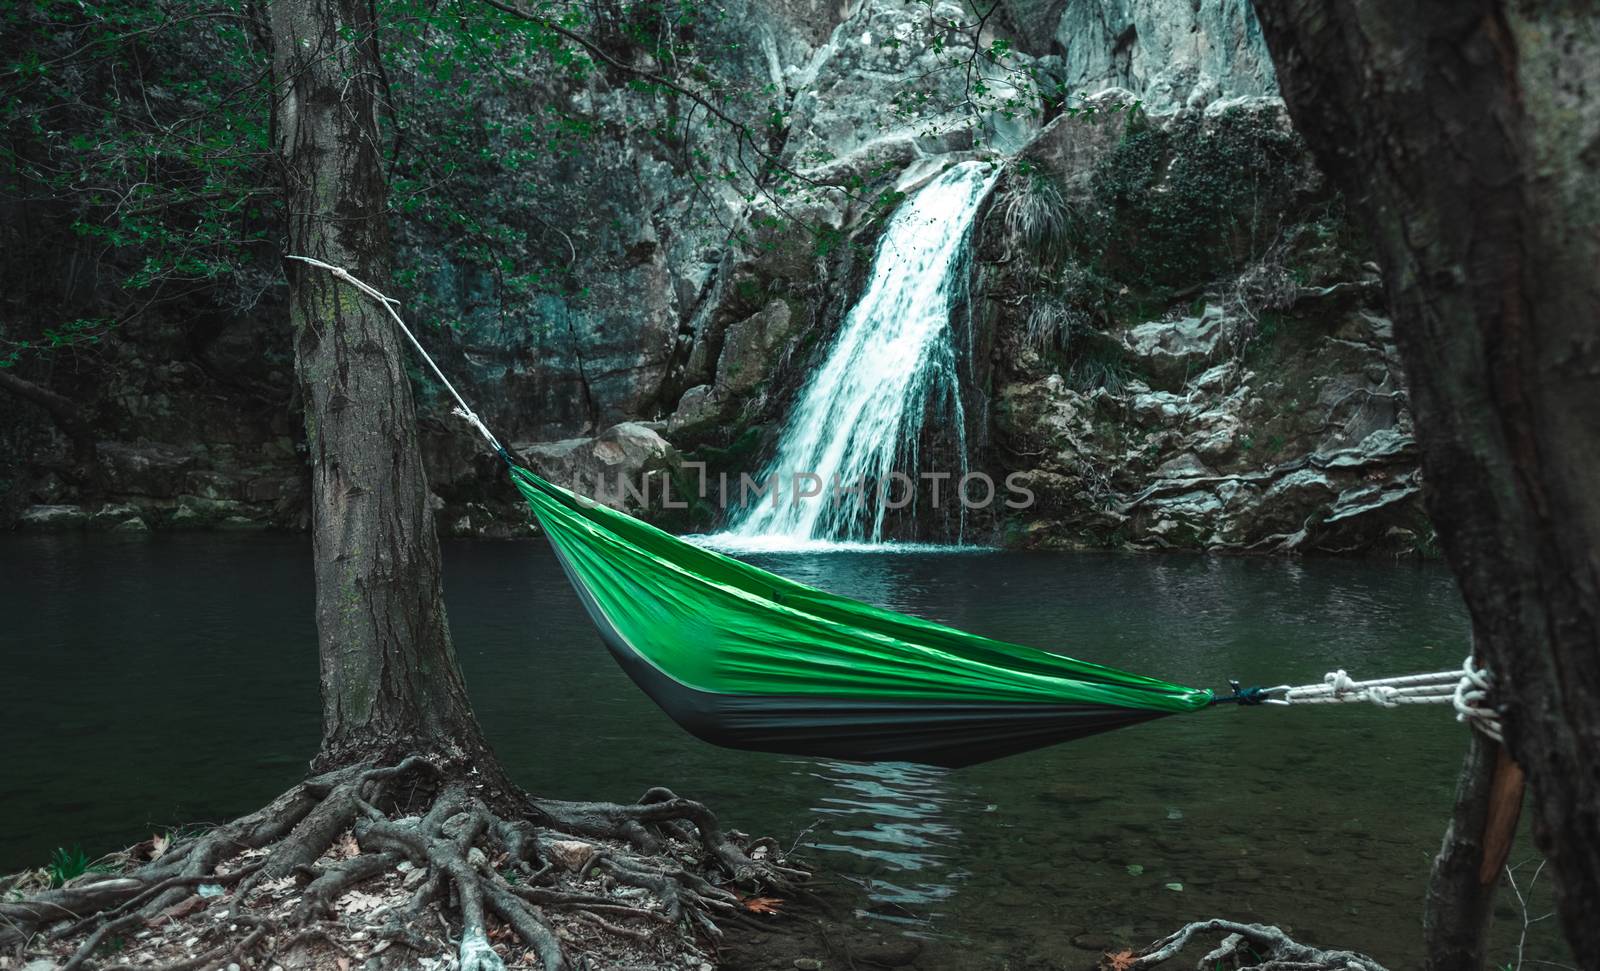 Green hammock with person in it between trees in front of a waterfall in Eksili, Antalya, Turkey.